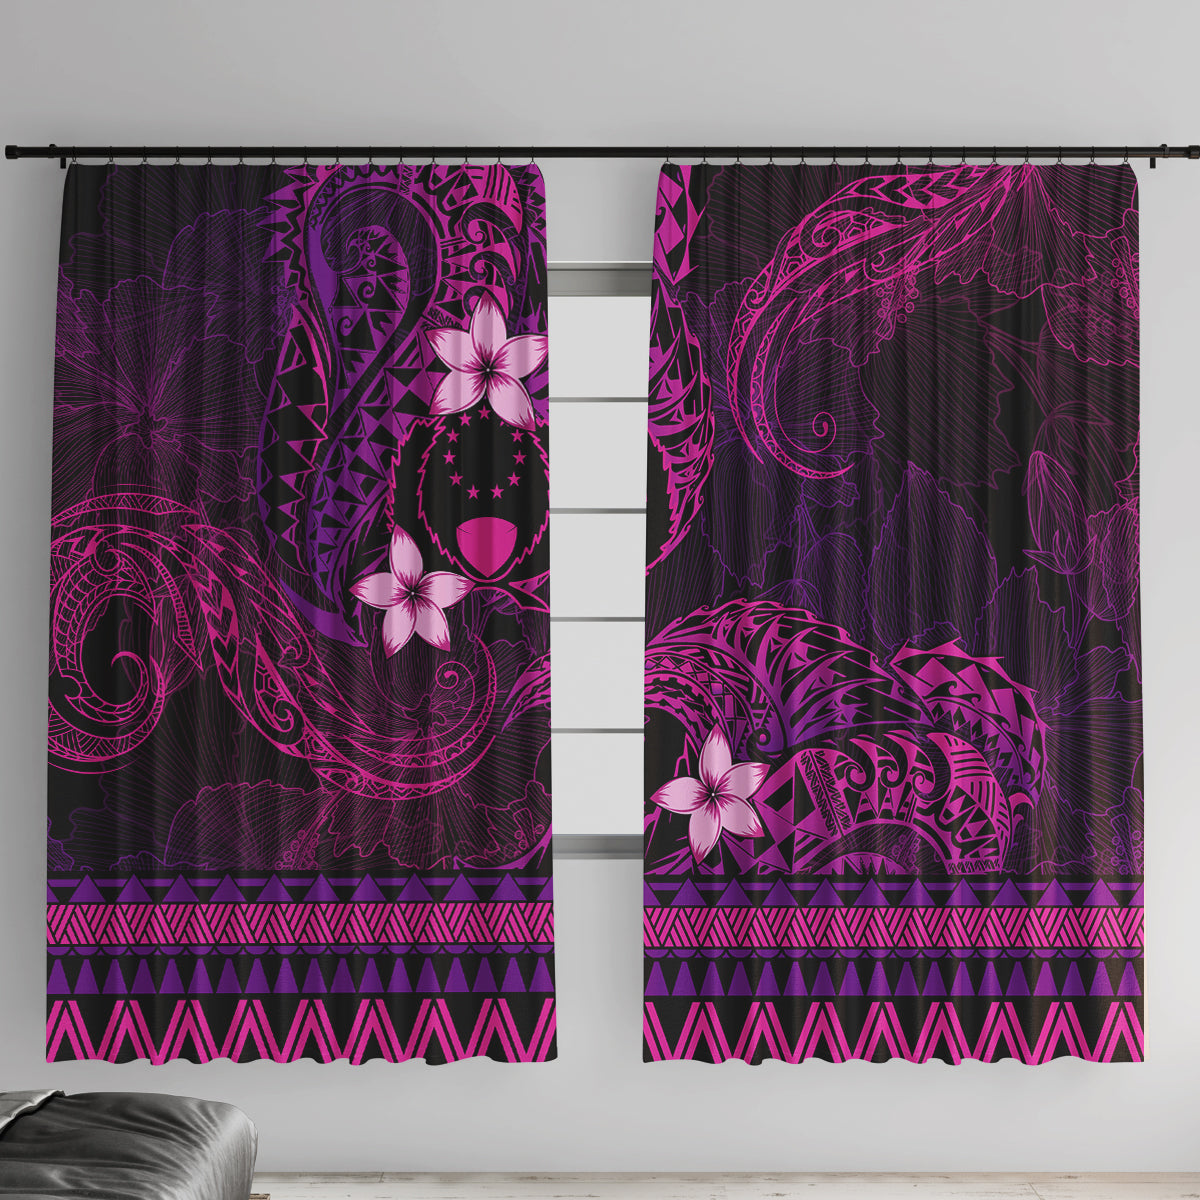 FSM Pohnpei State Window Curtain Tribal Pattern Pink Version LT01 With Hooks Pink - Polynesian Pride